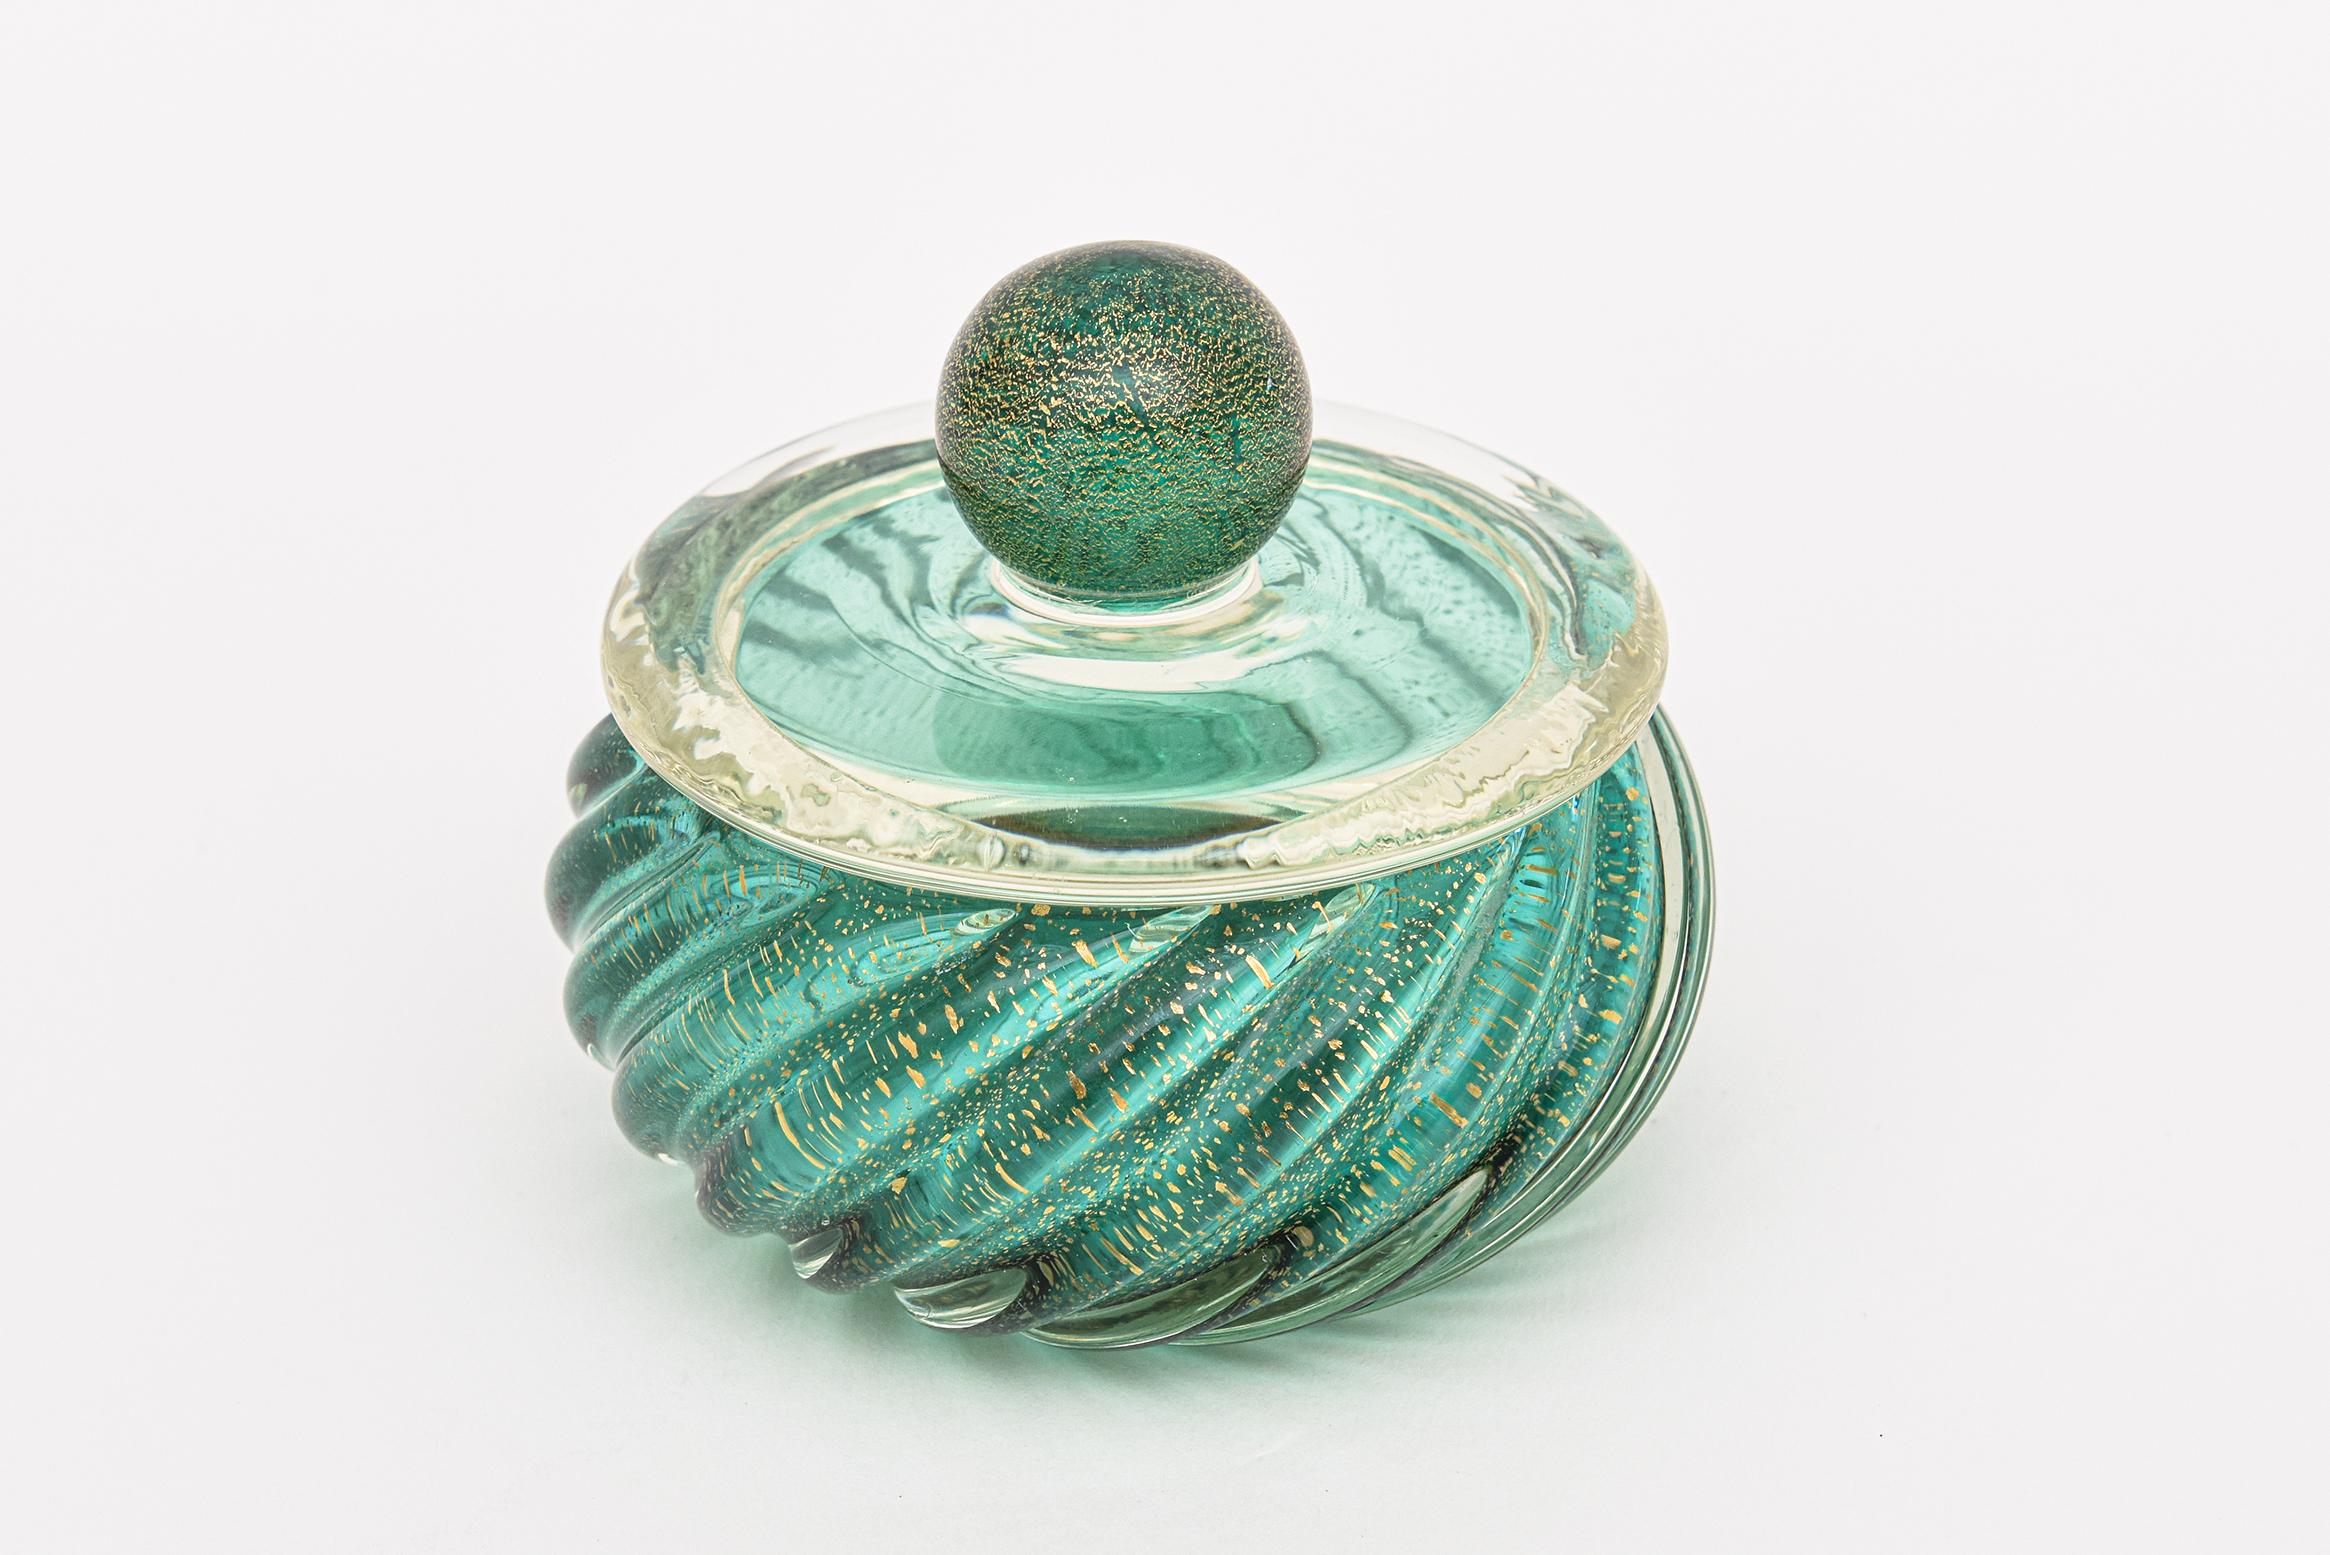 This luscious small vintage murano round glass box with a gold infused ball lid is by Barovier &Toso. It is from the 50's. The diagonal ribbed glass bowl are colors of sea green blue and emerald green with gold aventurine. The round ball glass top